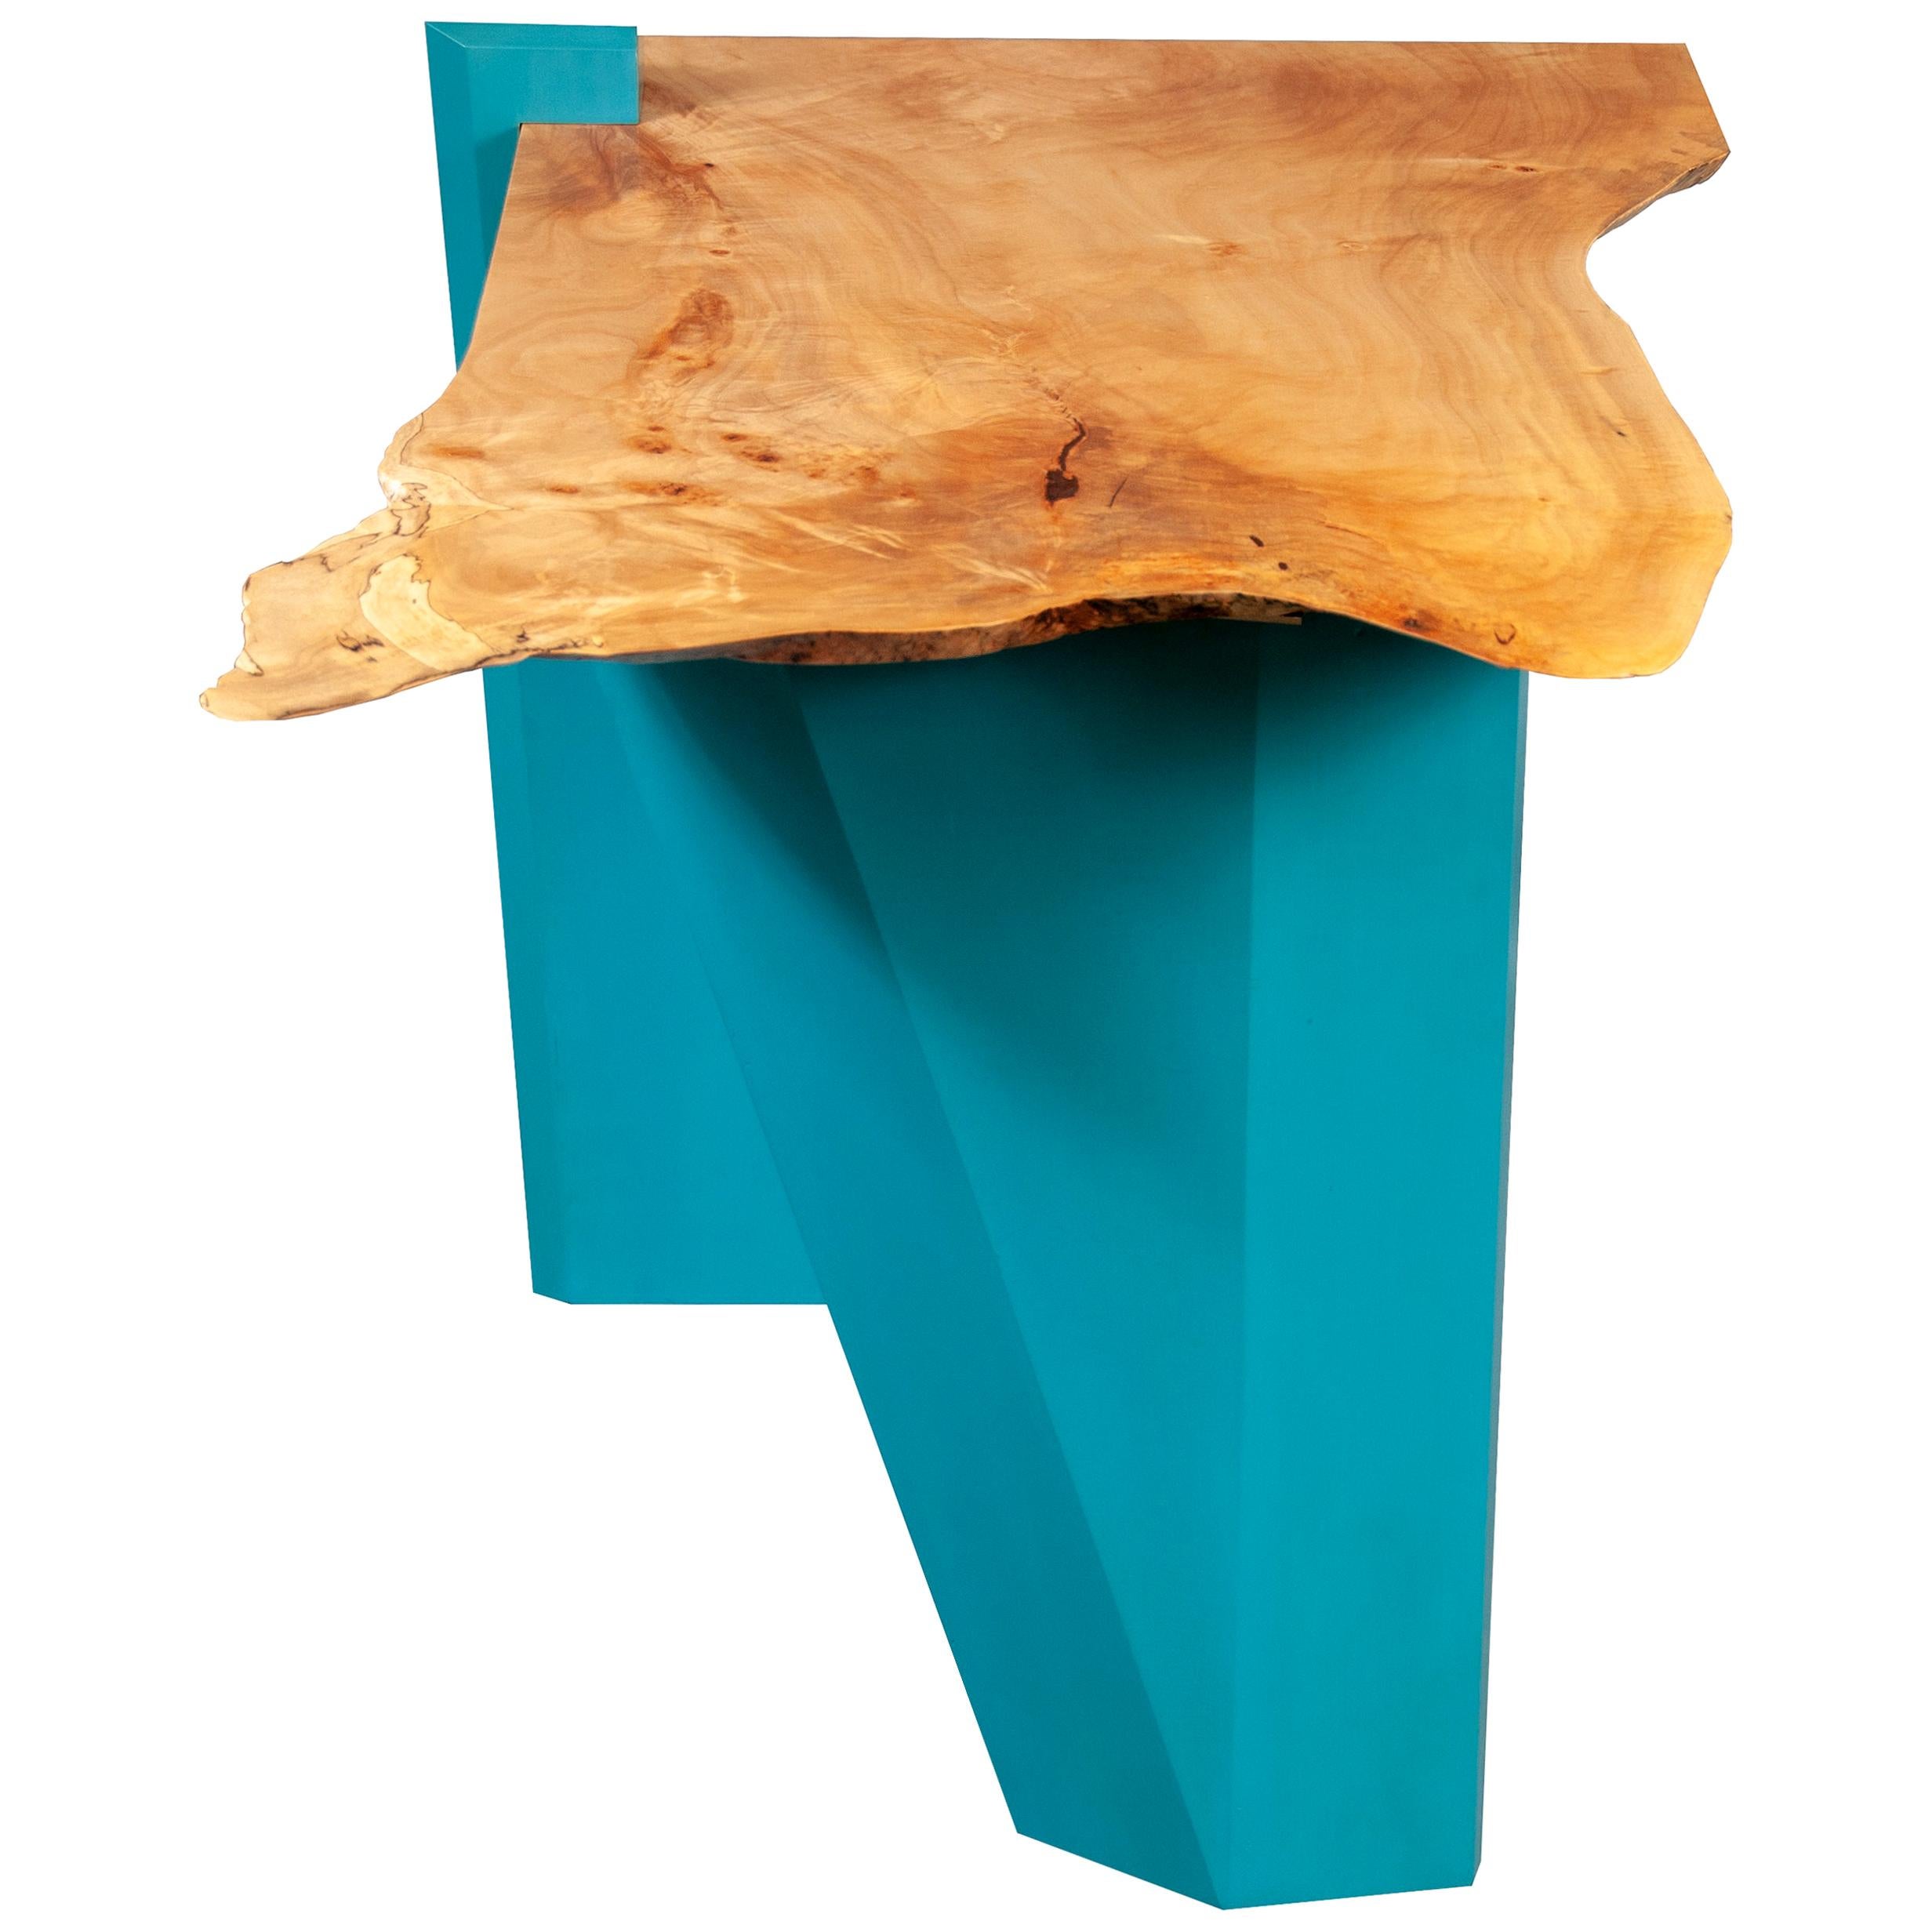 Sculptural Caribbean Blue Base with Live Edge Figured Maple Top End/Side Table